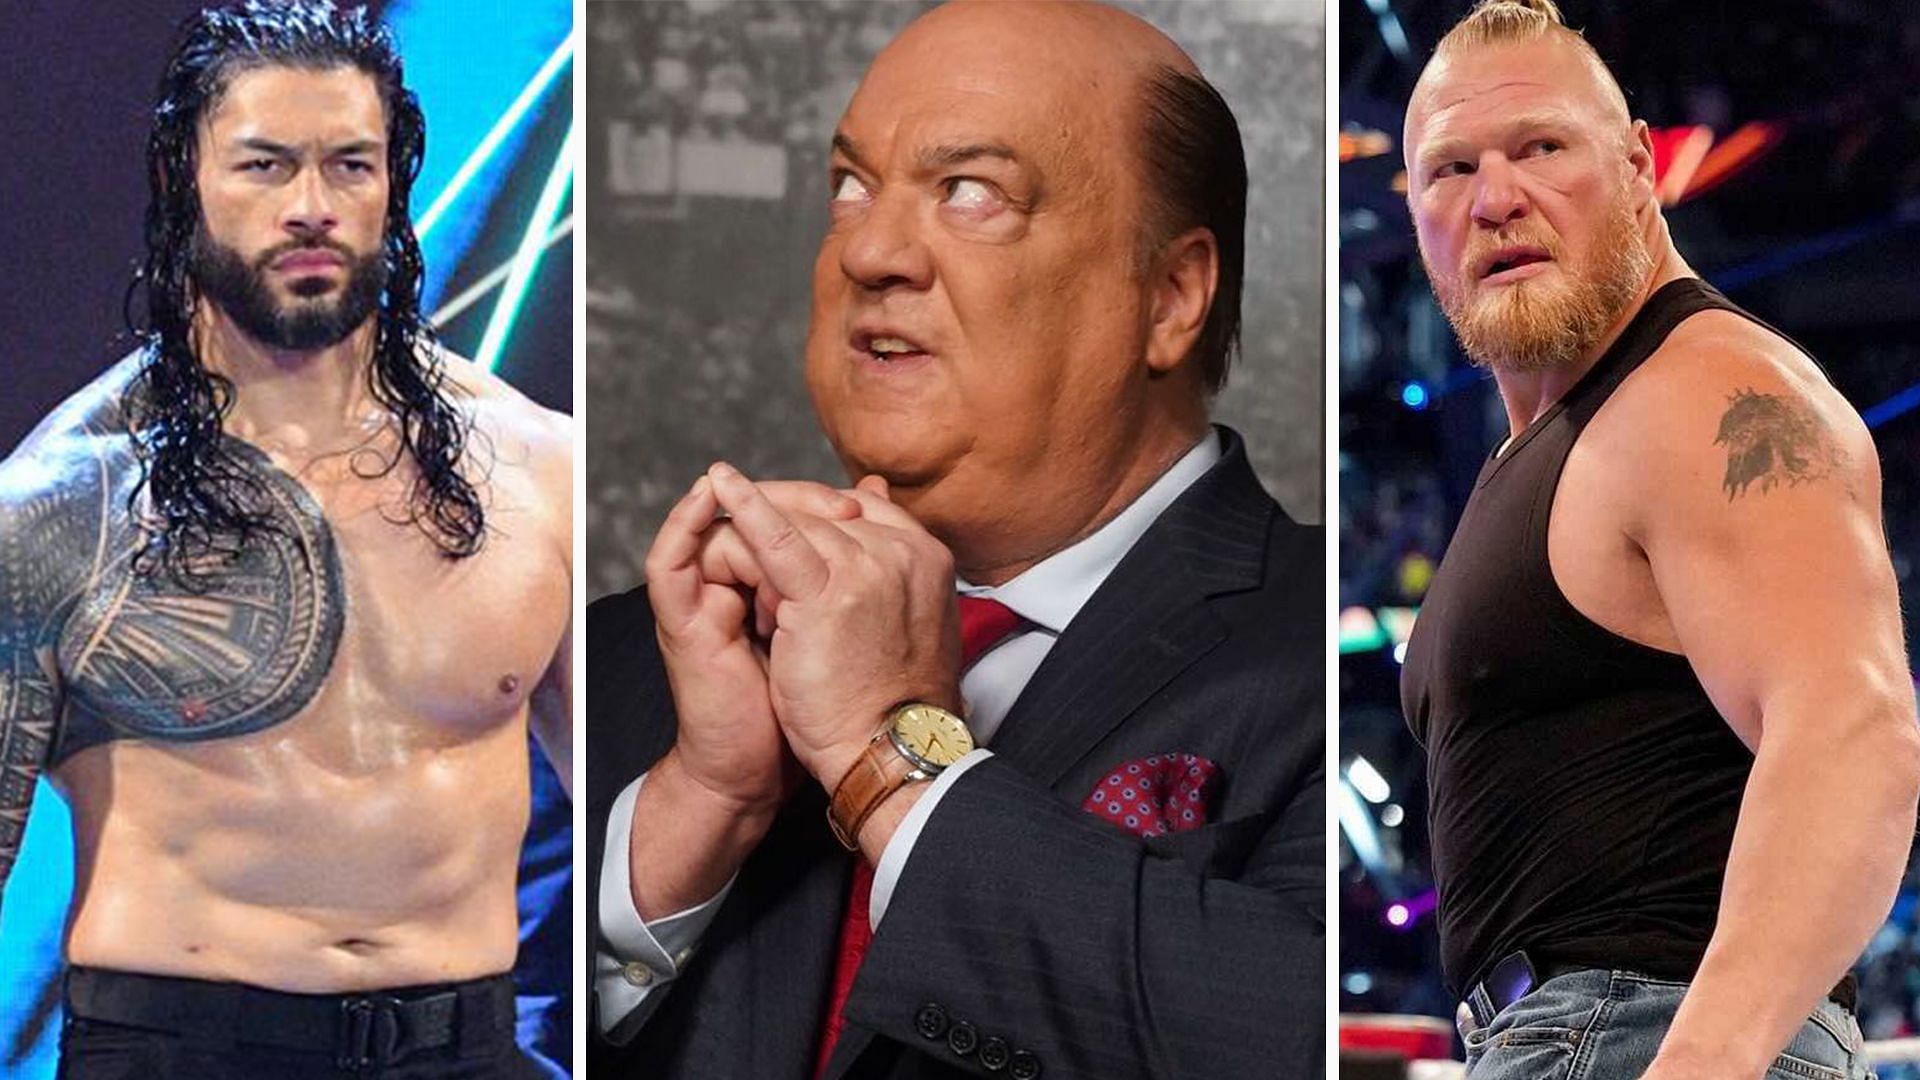 How will Paul Heyman affect the main event of Crown Jewel 2021?